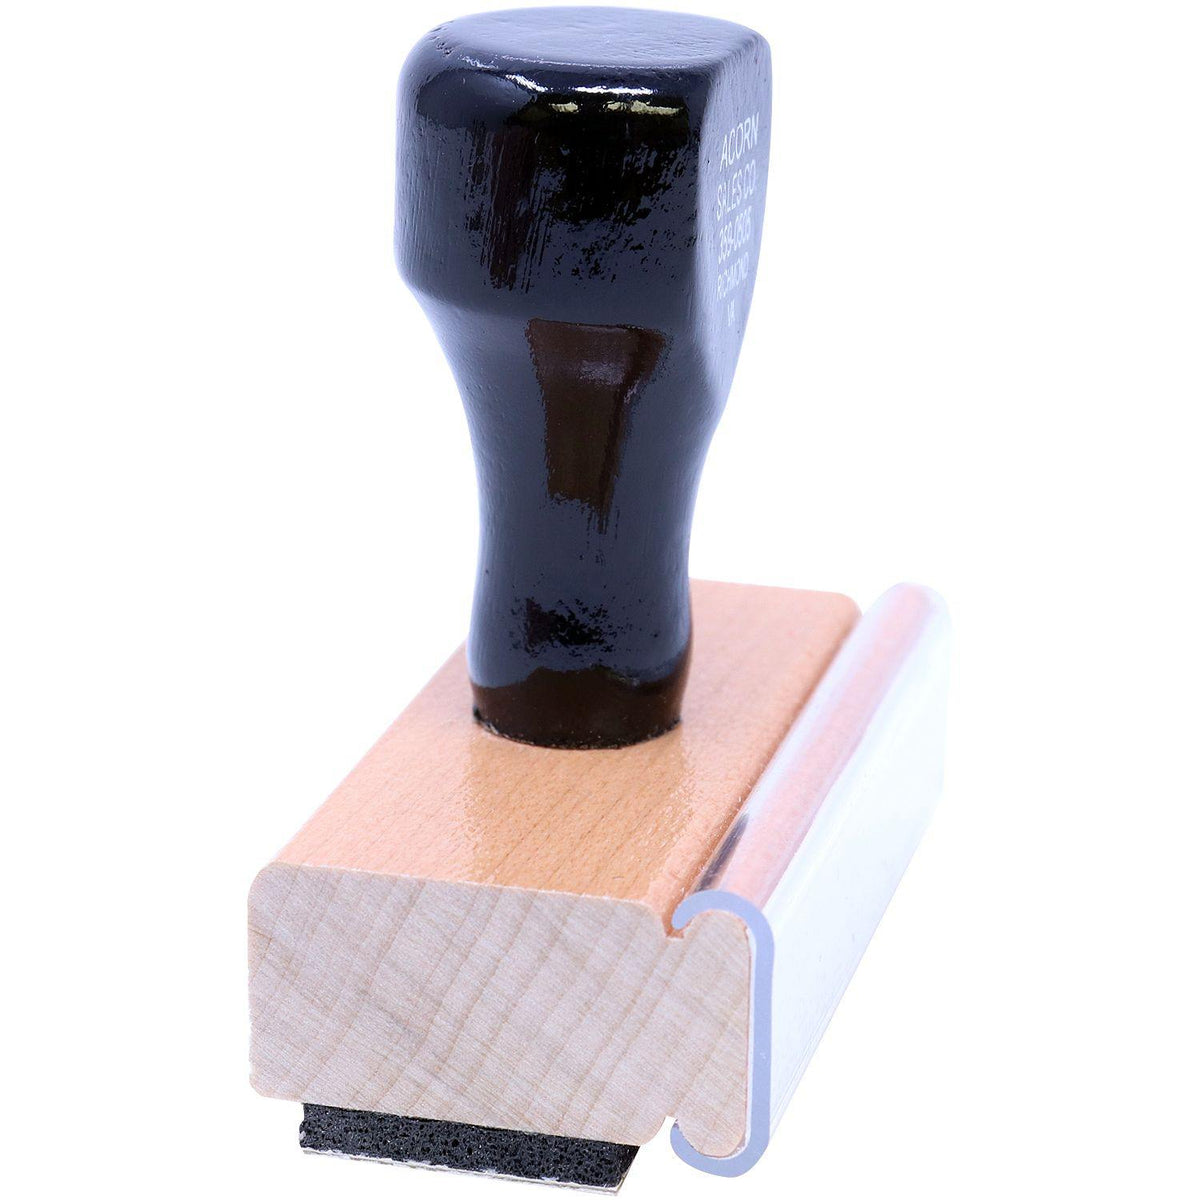 Side View of Large Borrador Rubber Stamp at an Angle